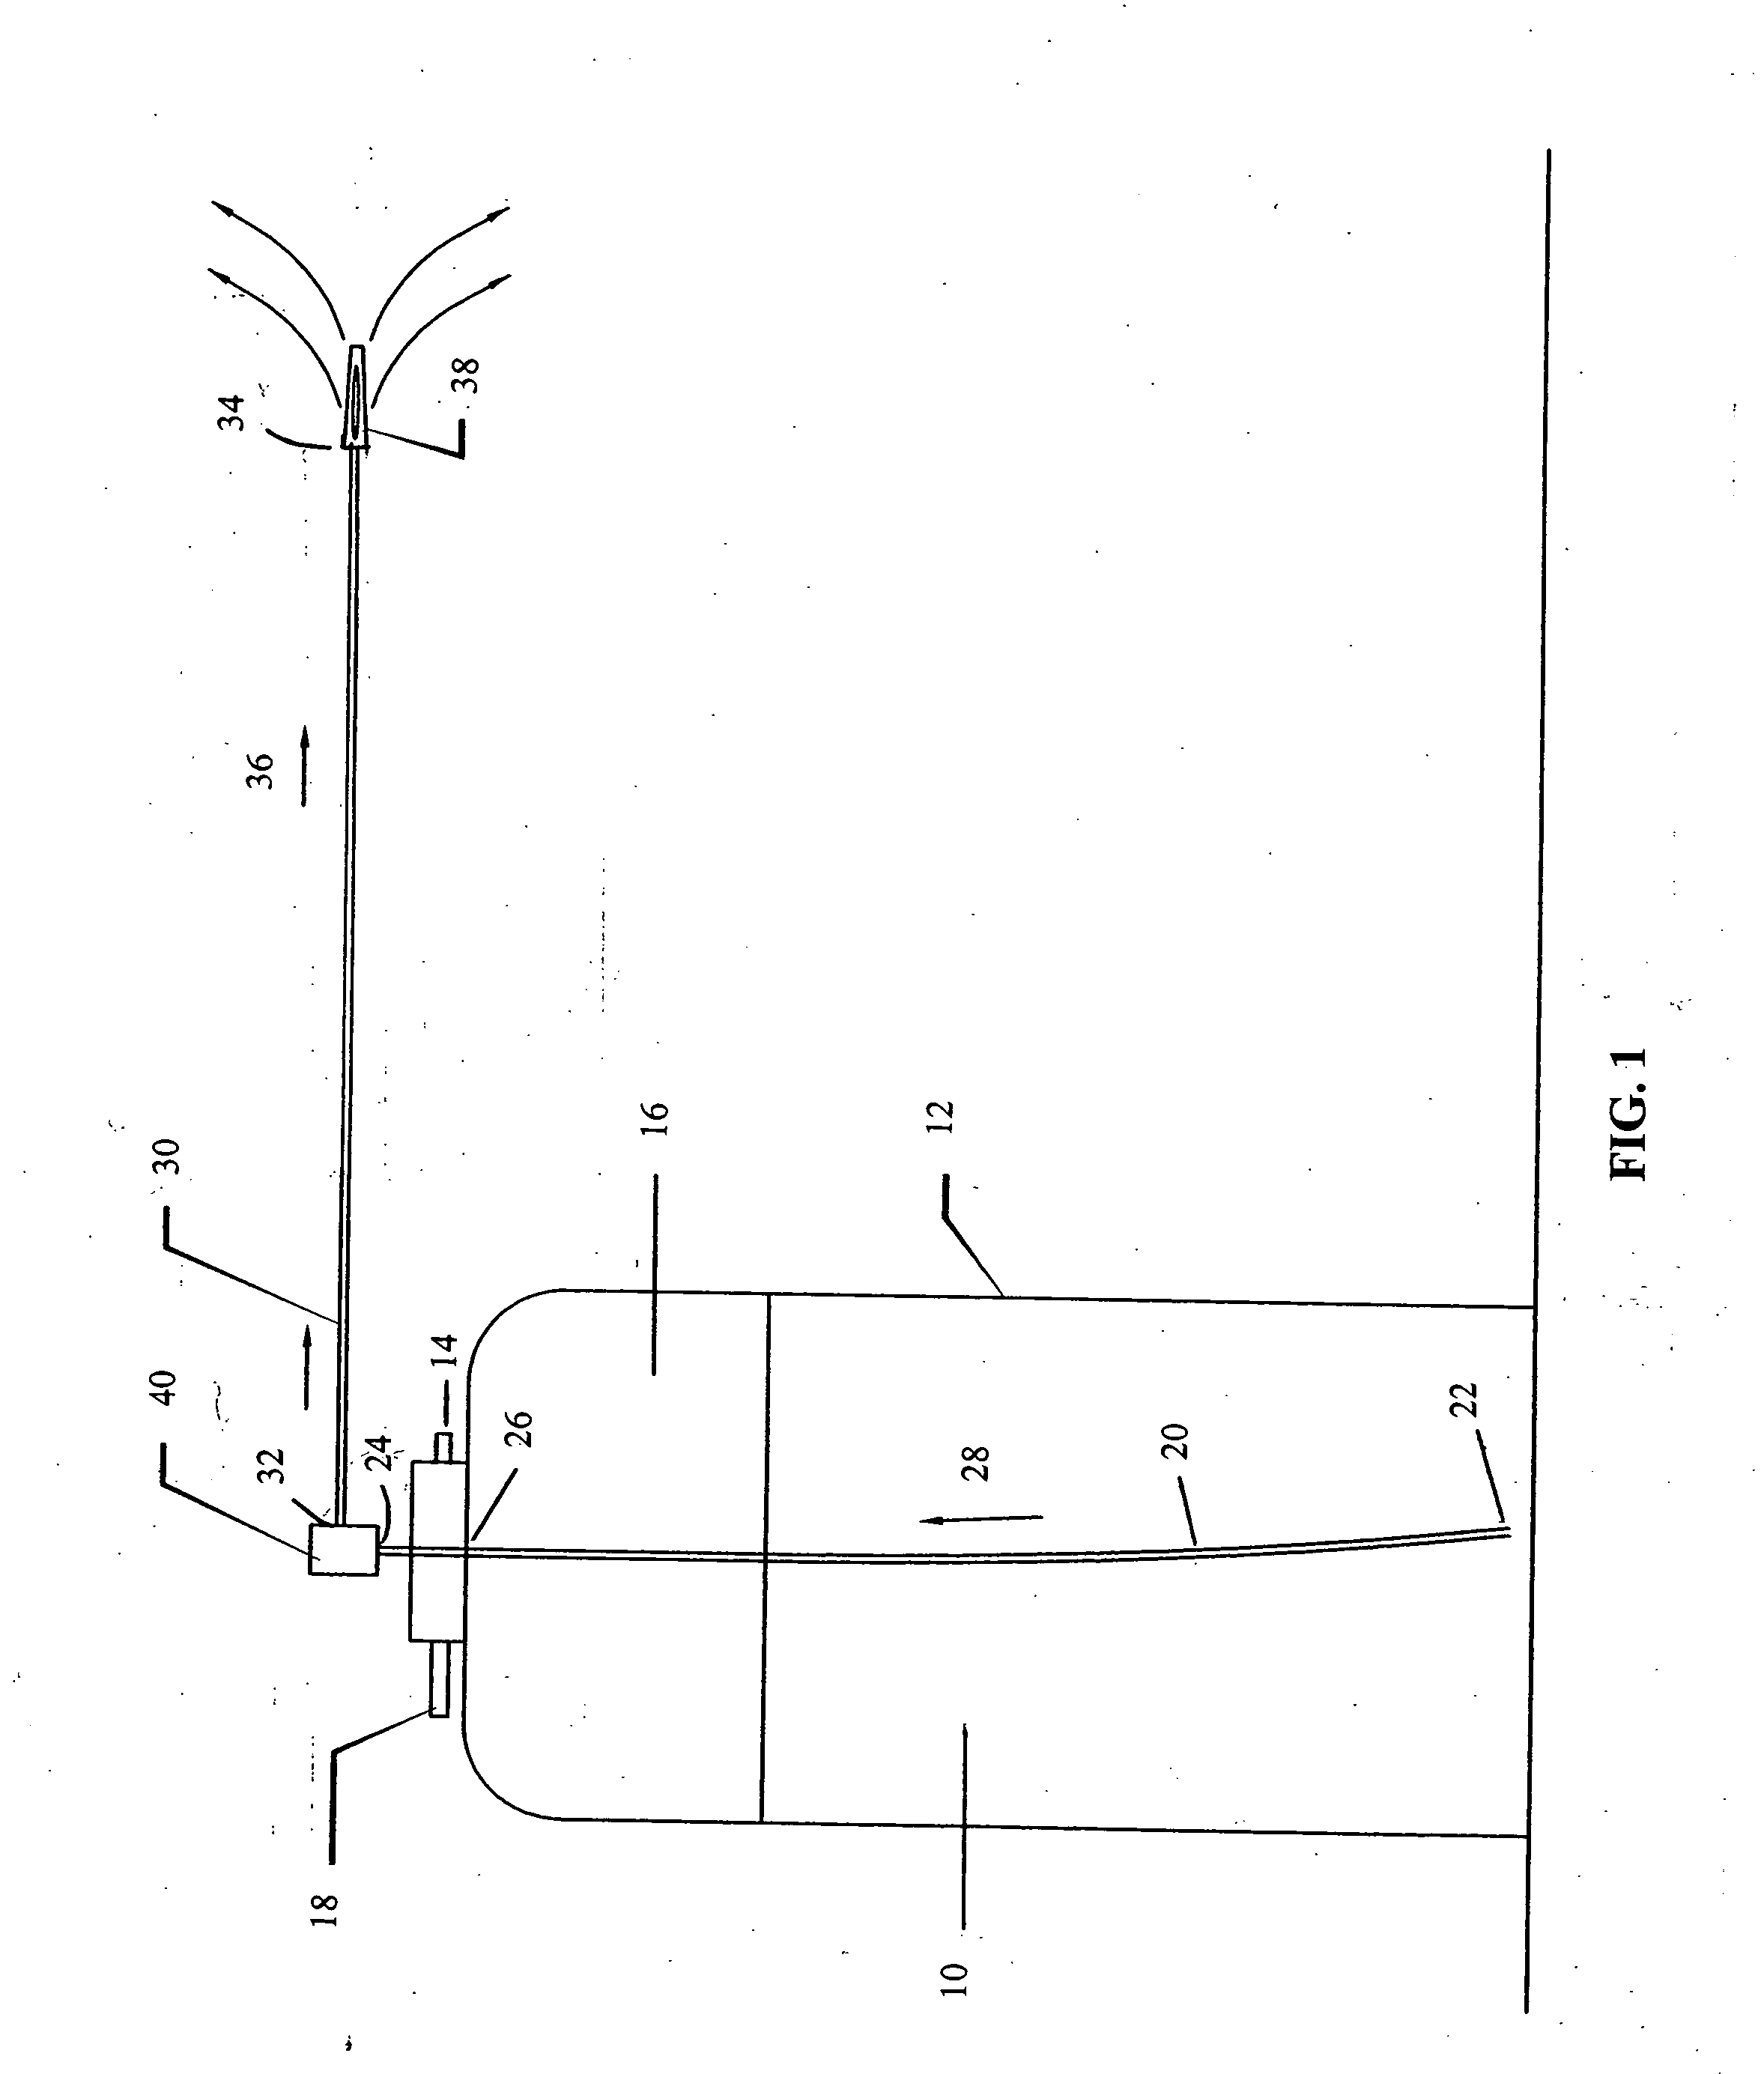 Apparatus and methods for enhanced plant and lawn growth using alkane injection